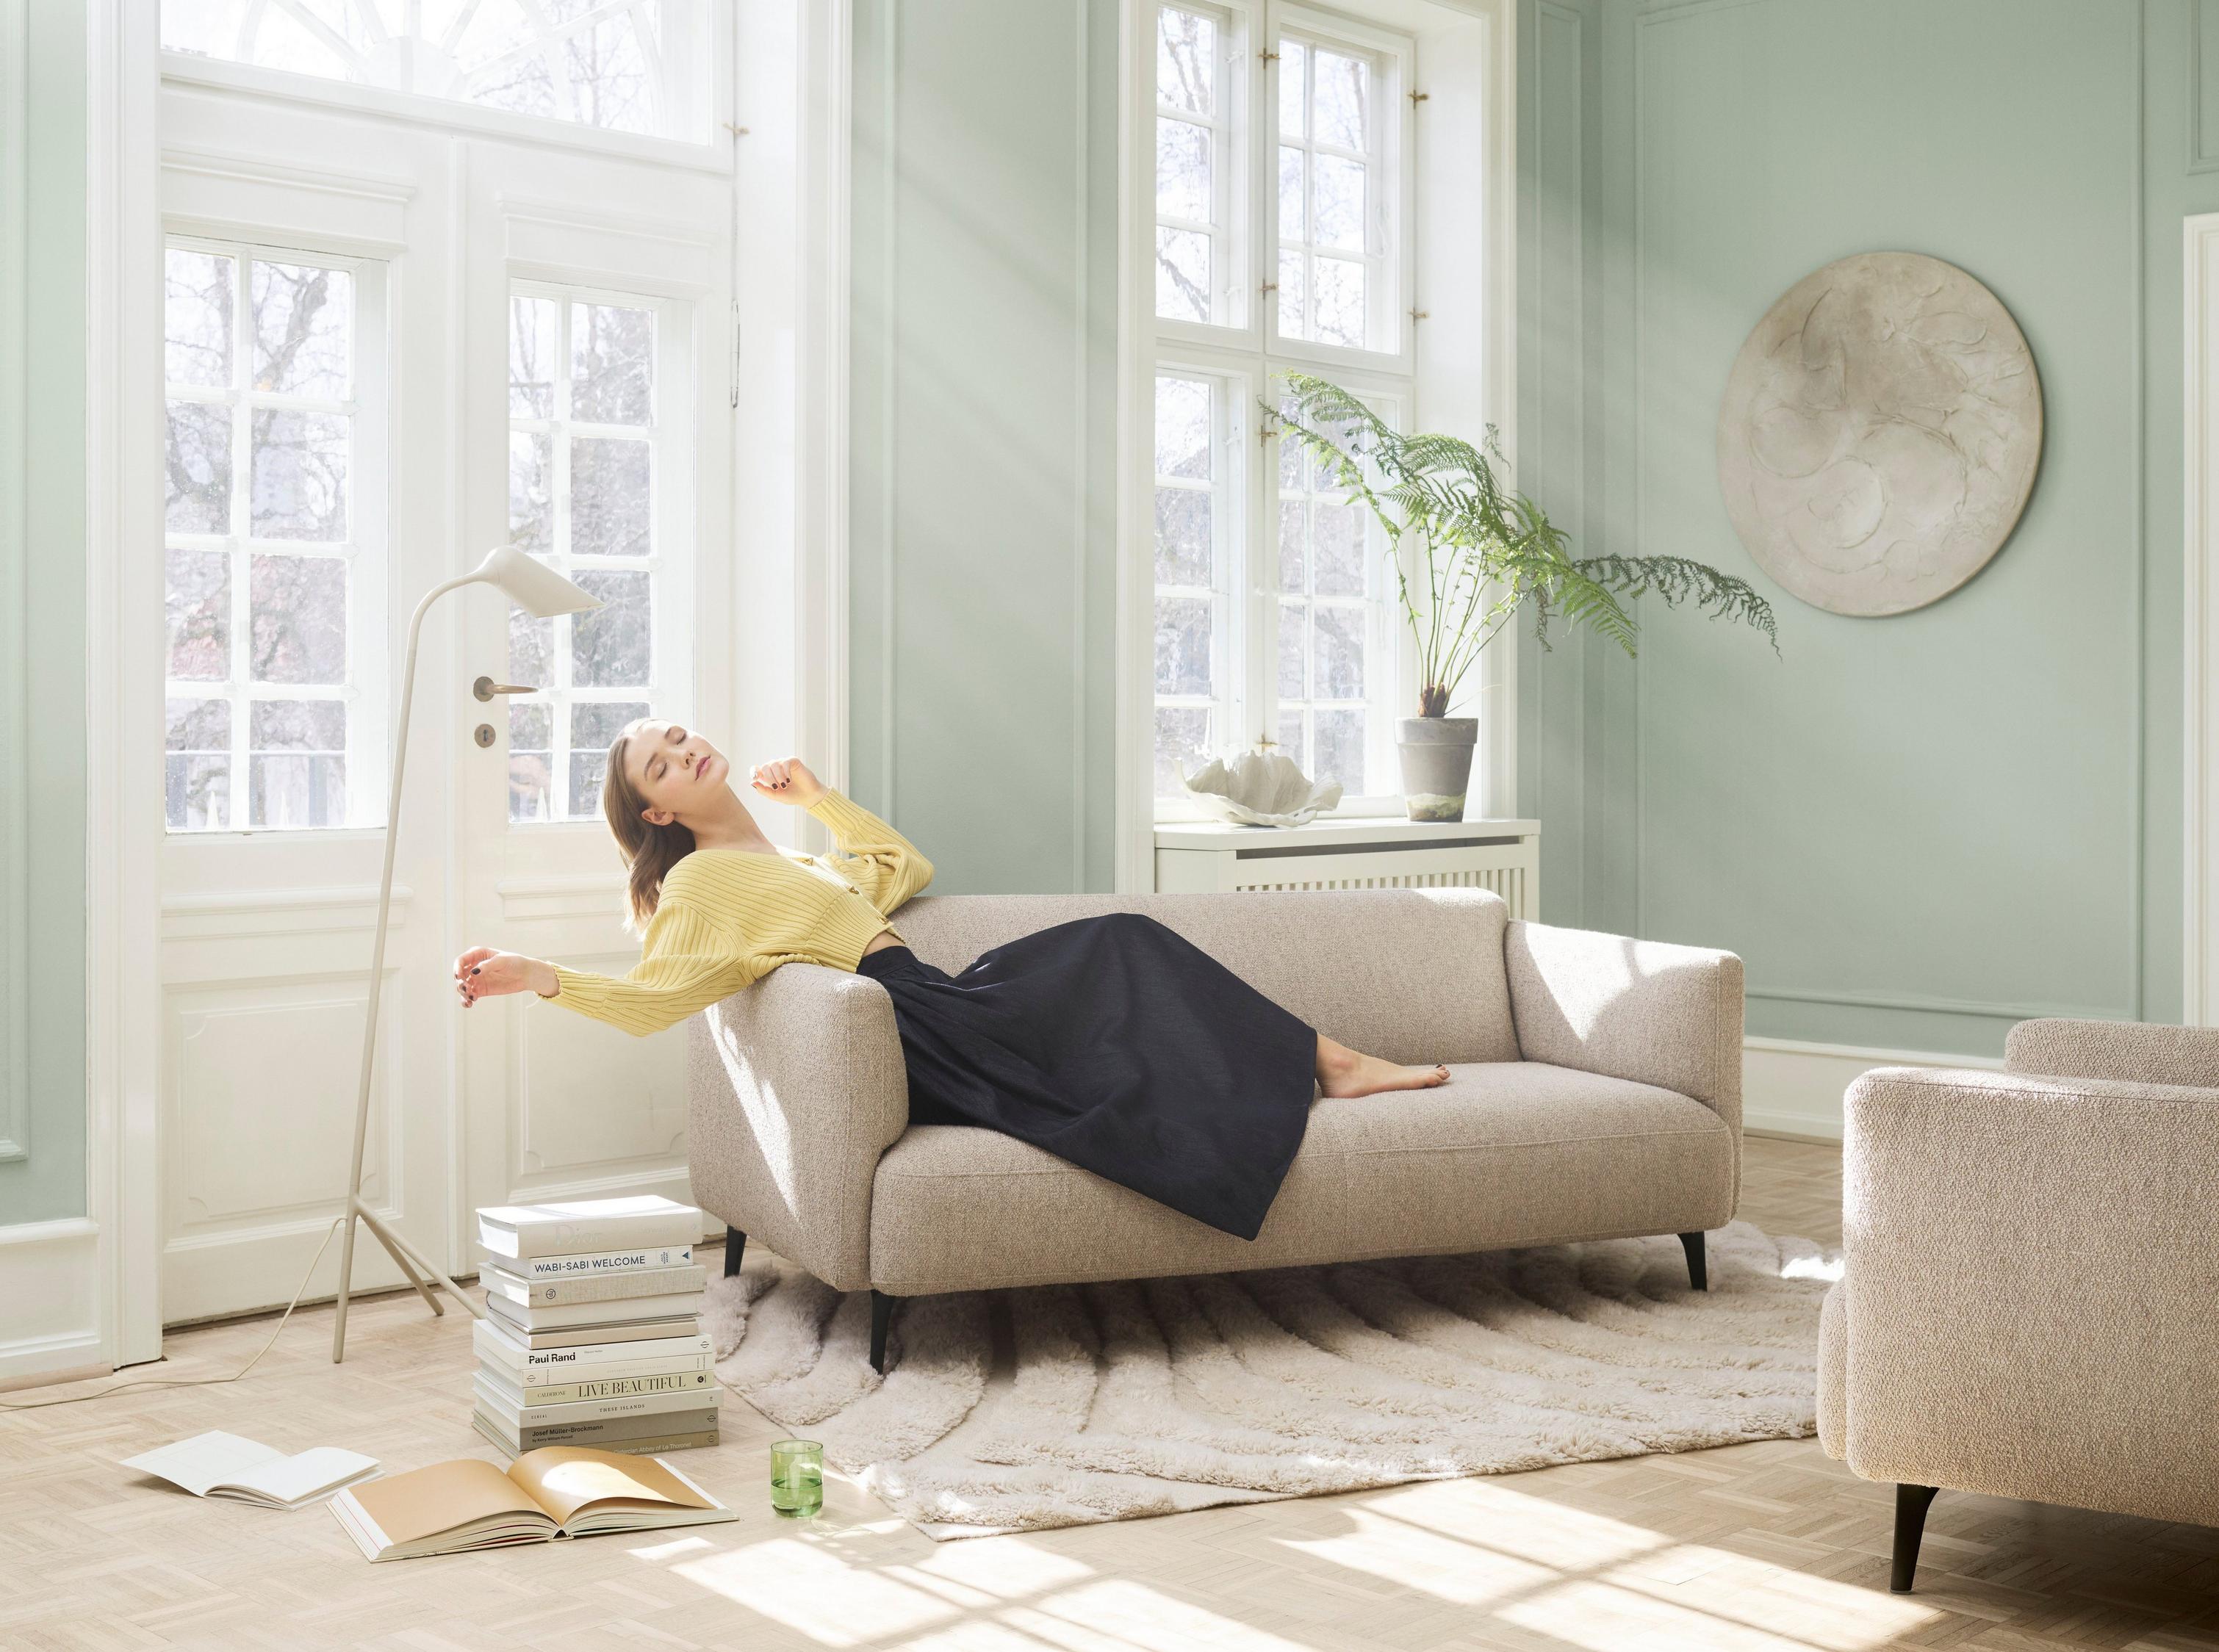 Woman lounging on the Modena sofa in a light-filled living room.